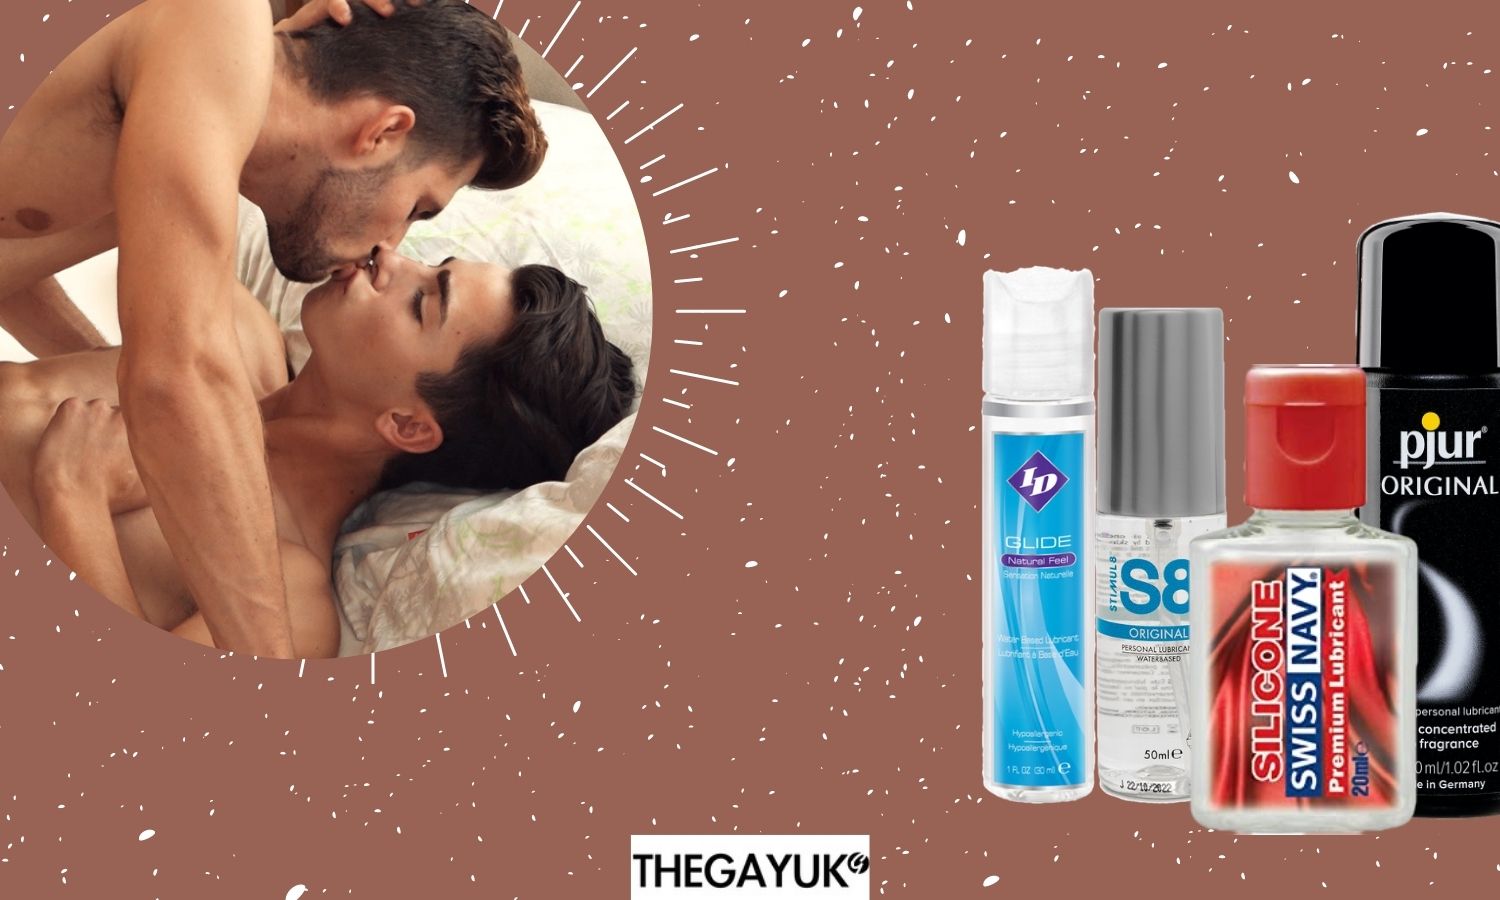 Here’s why you shouldn’t use those free packets of lube you get at a gay bar